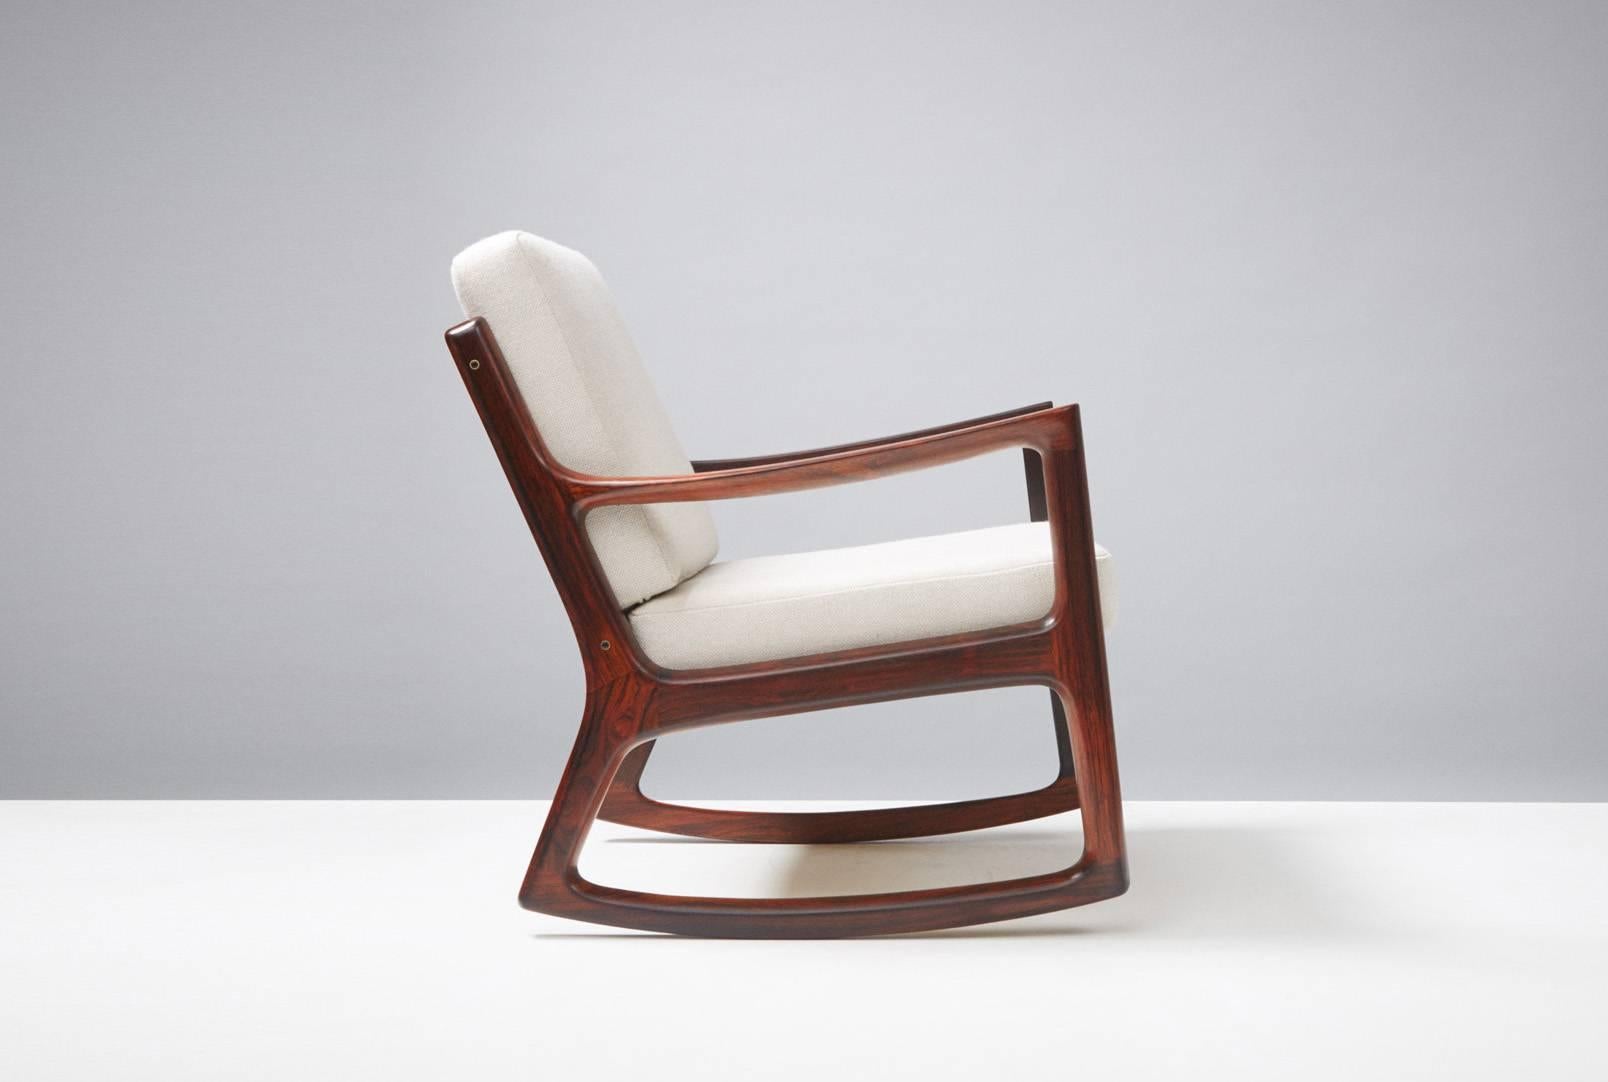 Rare rosewood edition of the 'Senator' rocking chair, circa 1960. Produced by France and Son, Denmark. Solid Brazilian rosewood. Includes maker's stamp and badge. New cushions covered in Kvadrat Hallingdal #103 wool fabric.